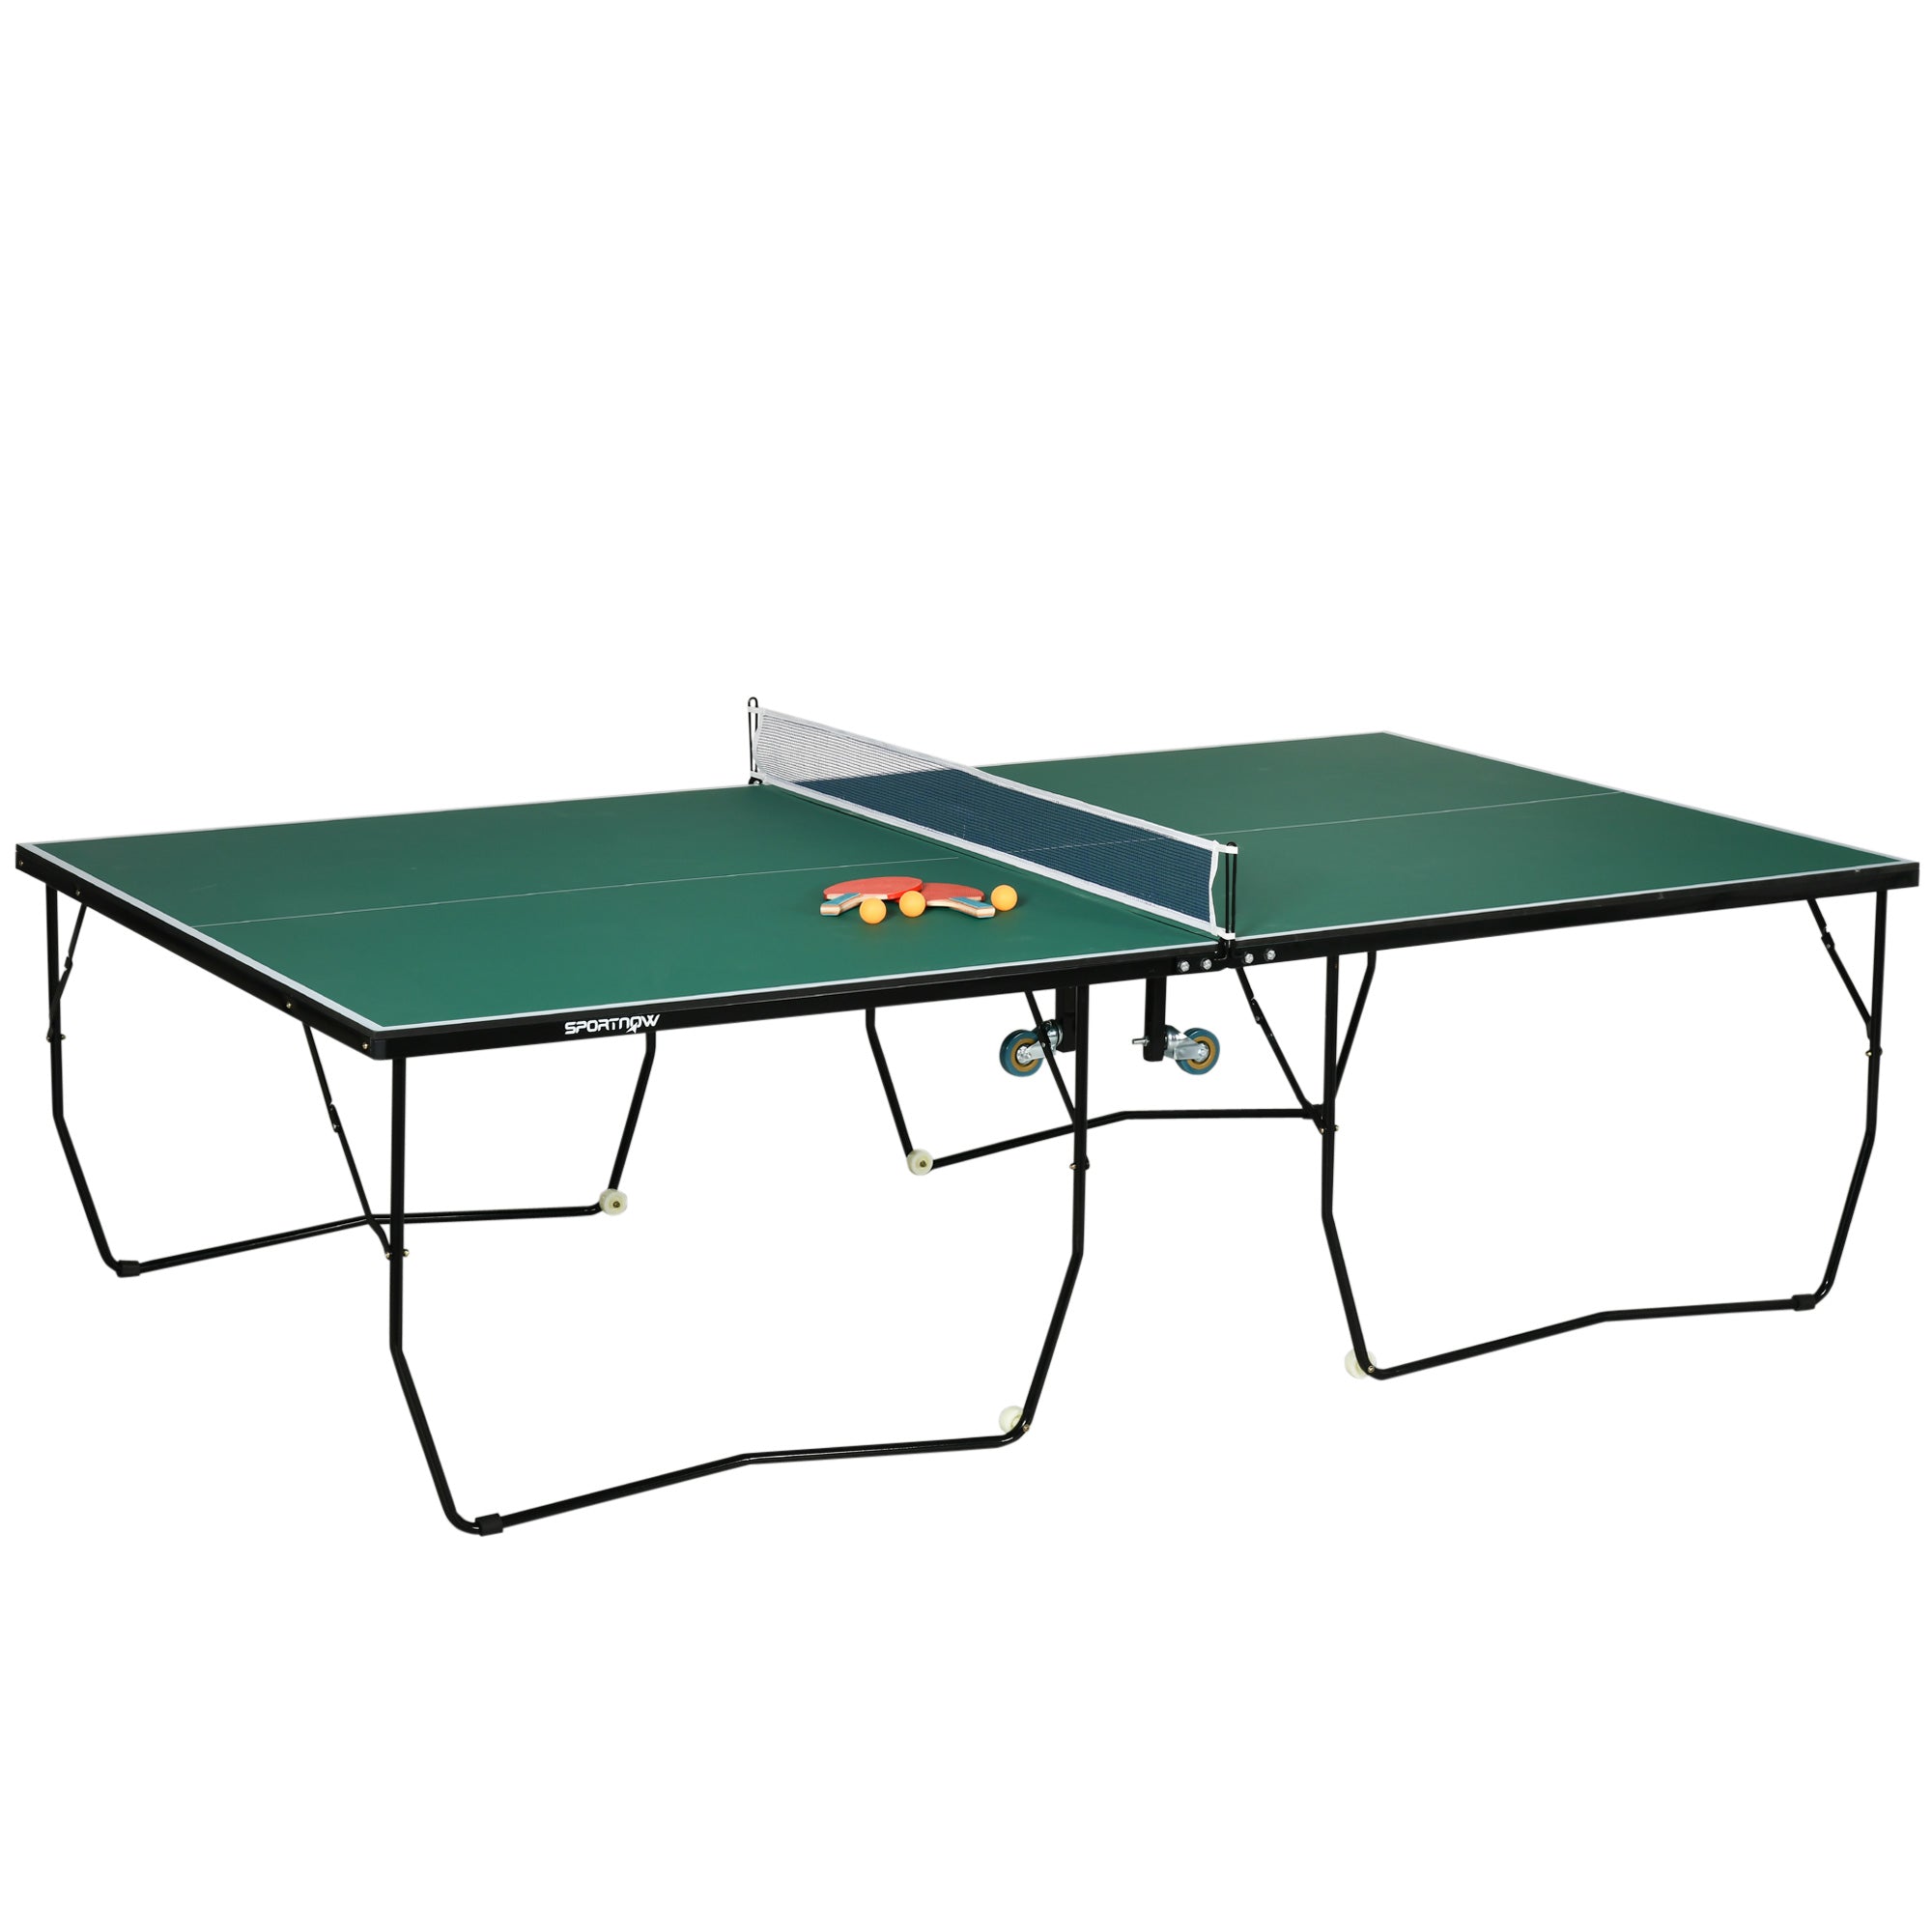 9FT Outdoor Folding Table, Tennis Table, with 8 Wheels, for Indoor and Outdoor Use - Green-0